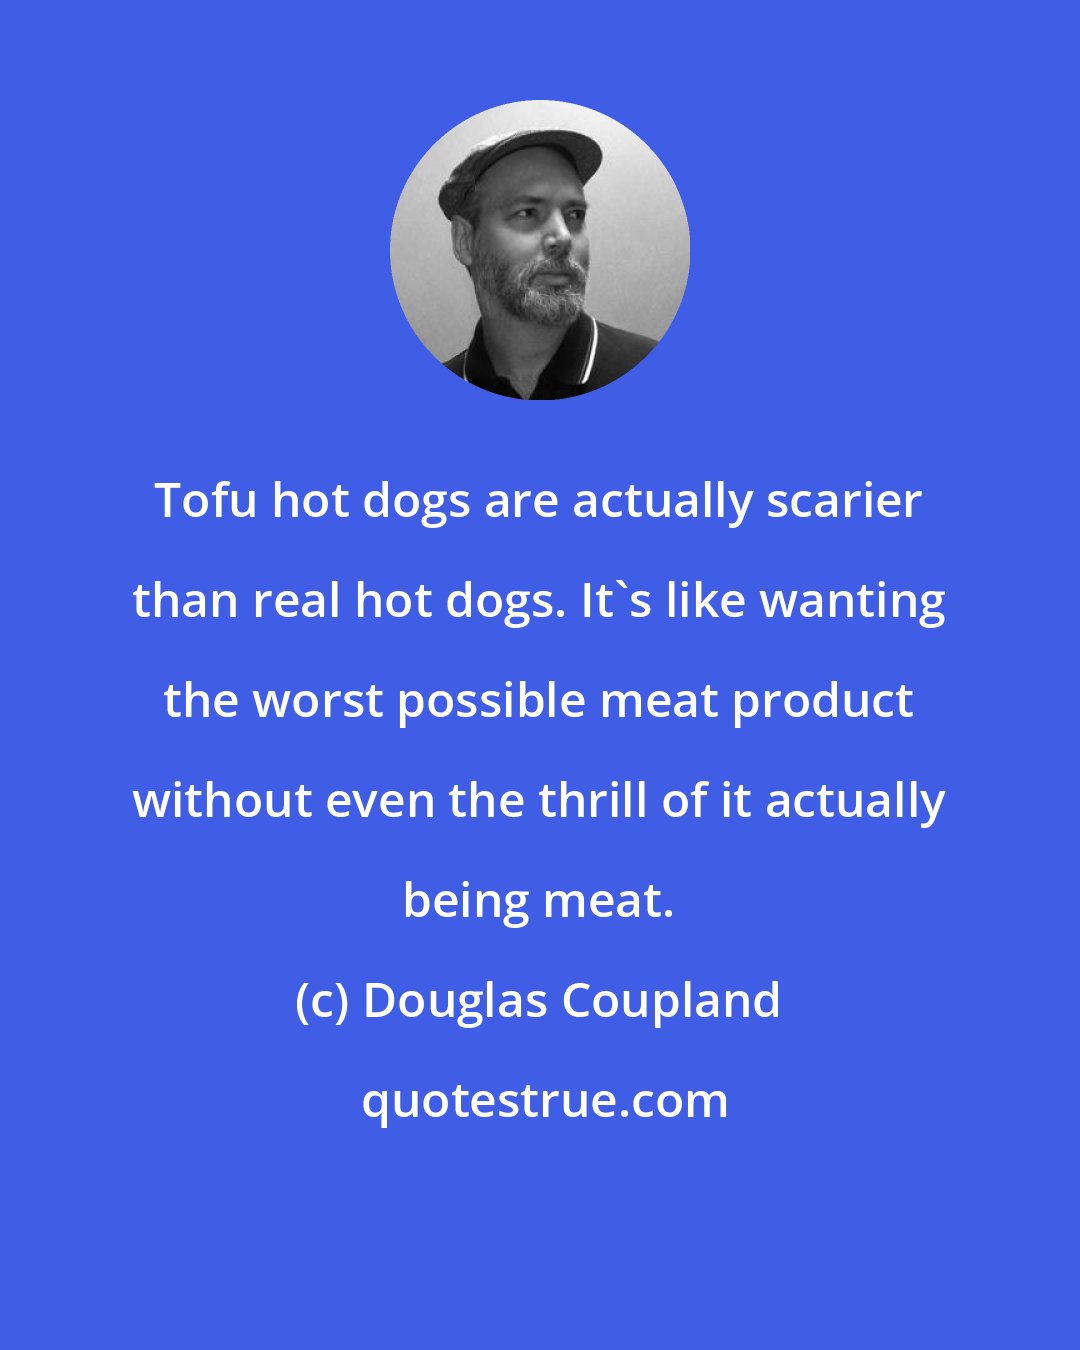 Douglas Coupland: Tofu hot dogs are actually scarier than real hot dogs. It's like wanting the worst possible meat product without even the thrill of it actually being meat.